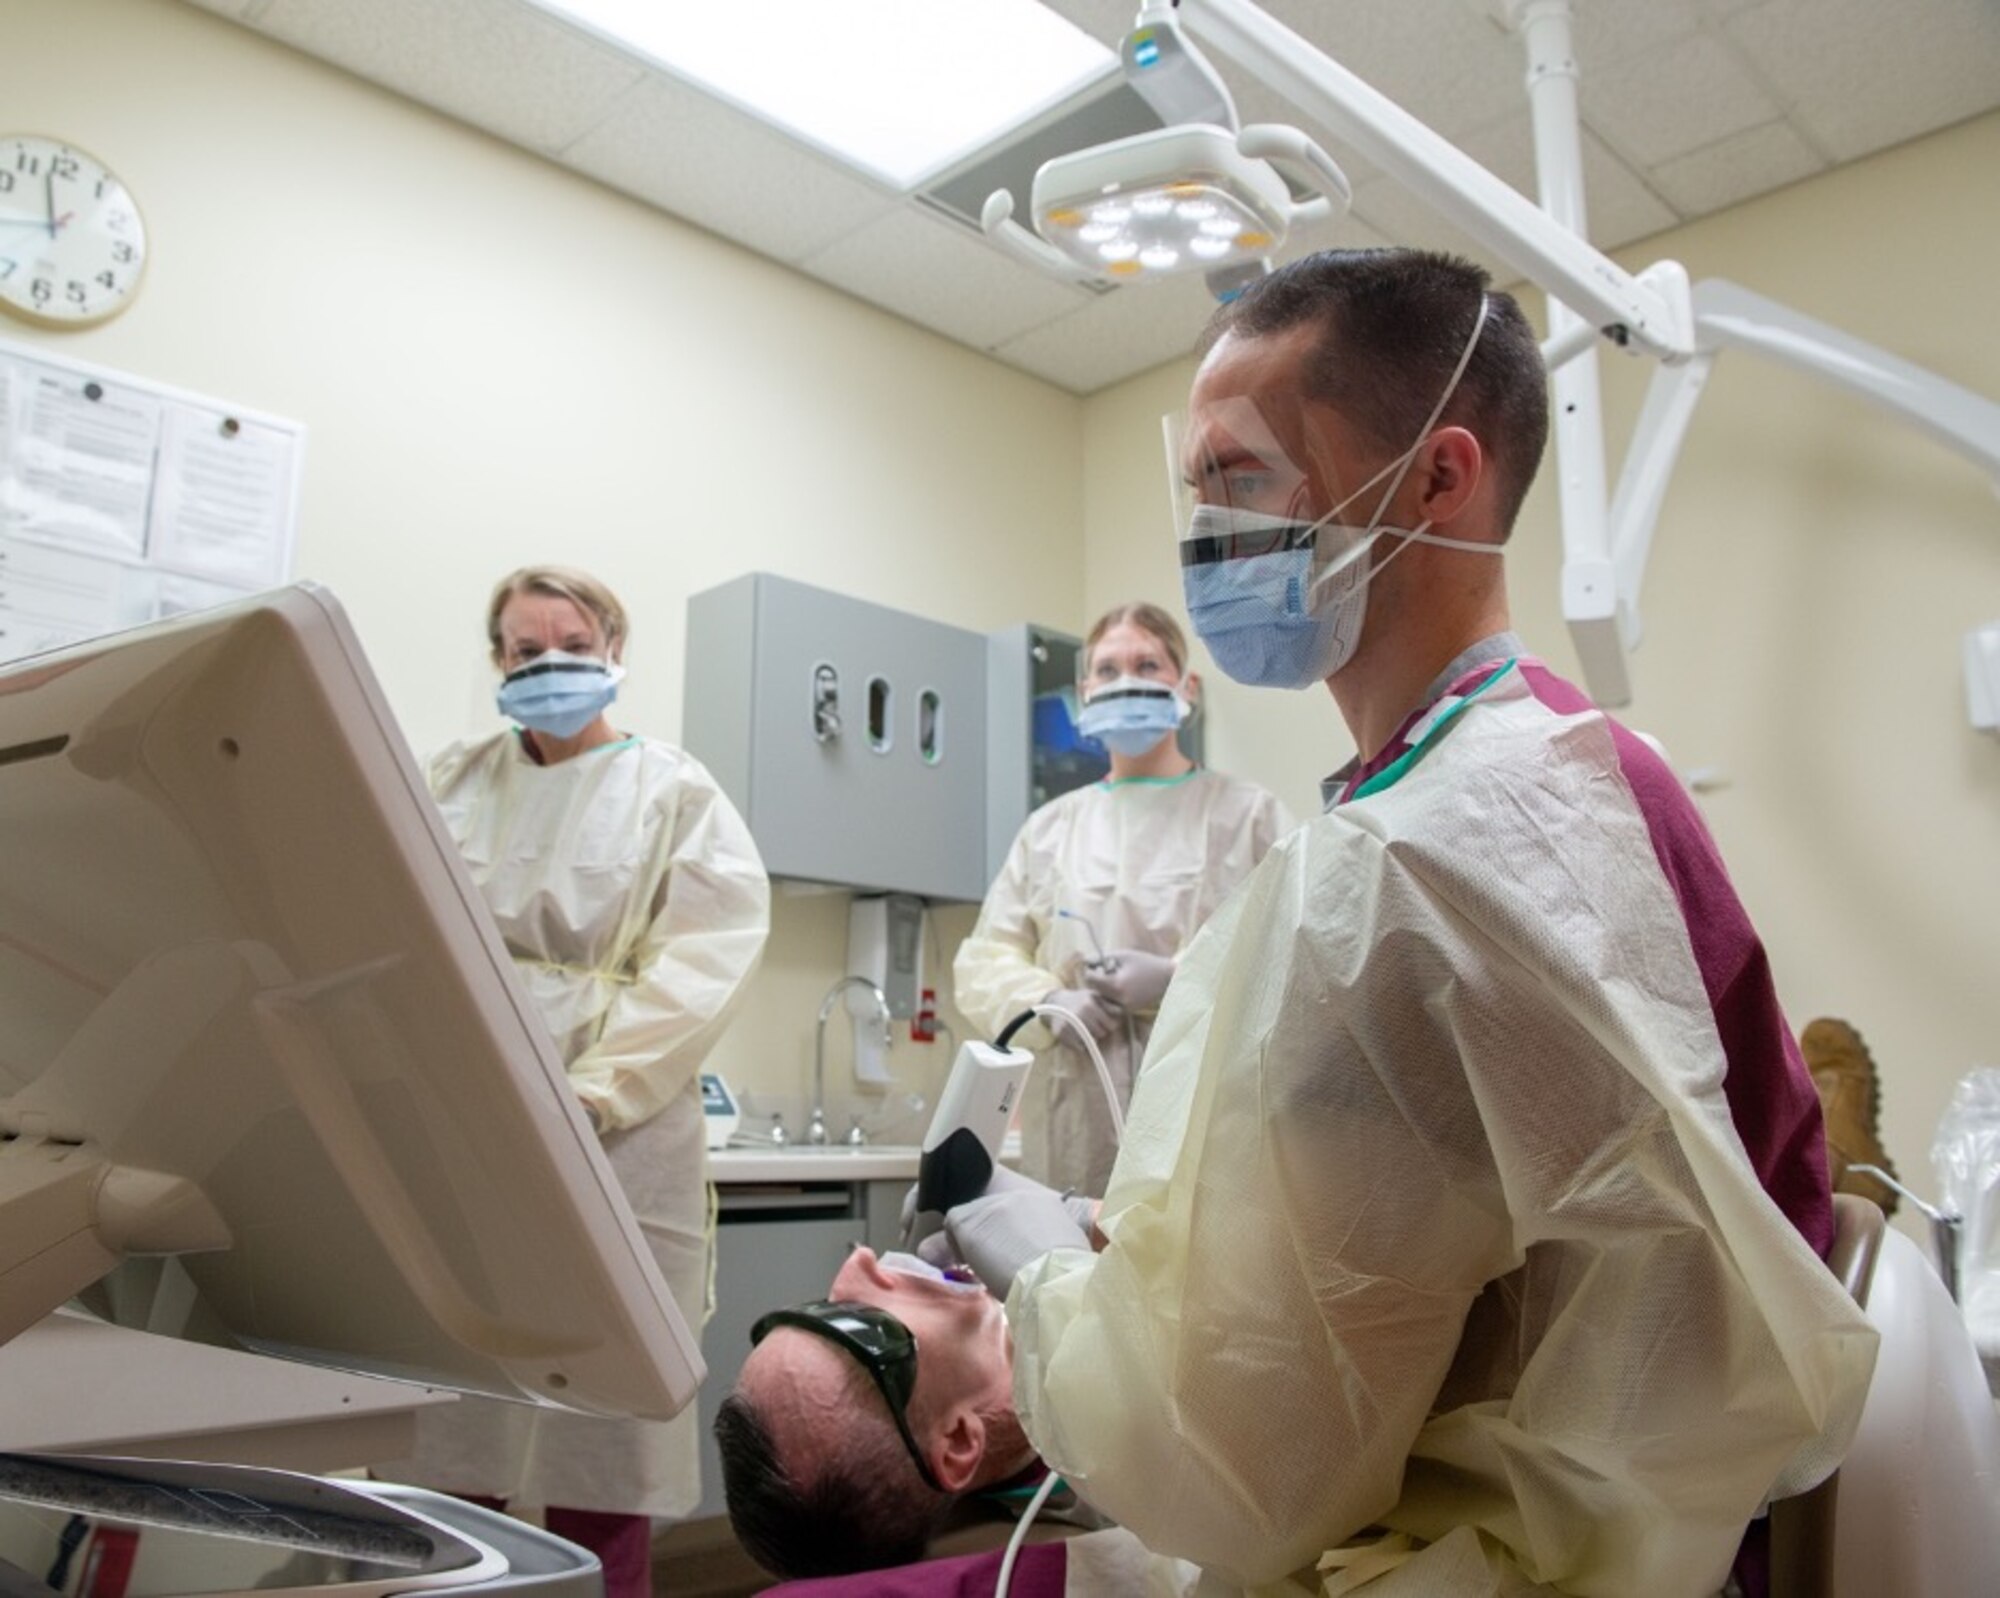 U.S. Air Force Senior Airman Regan Bassett, front, a dental technician assigned to the 673d Dental Squadron, performs a dental scan on U.S. Air Force Chief Master Sgt. Lee Mills, Joint Base Elmendorf-Richardson and 673d Air Base Wing command chief, during a 673d Dental Squadron immersion tour at Joint Base Elmendorf-Richardson, Alaska, March 2, 2021.